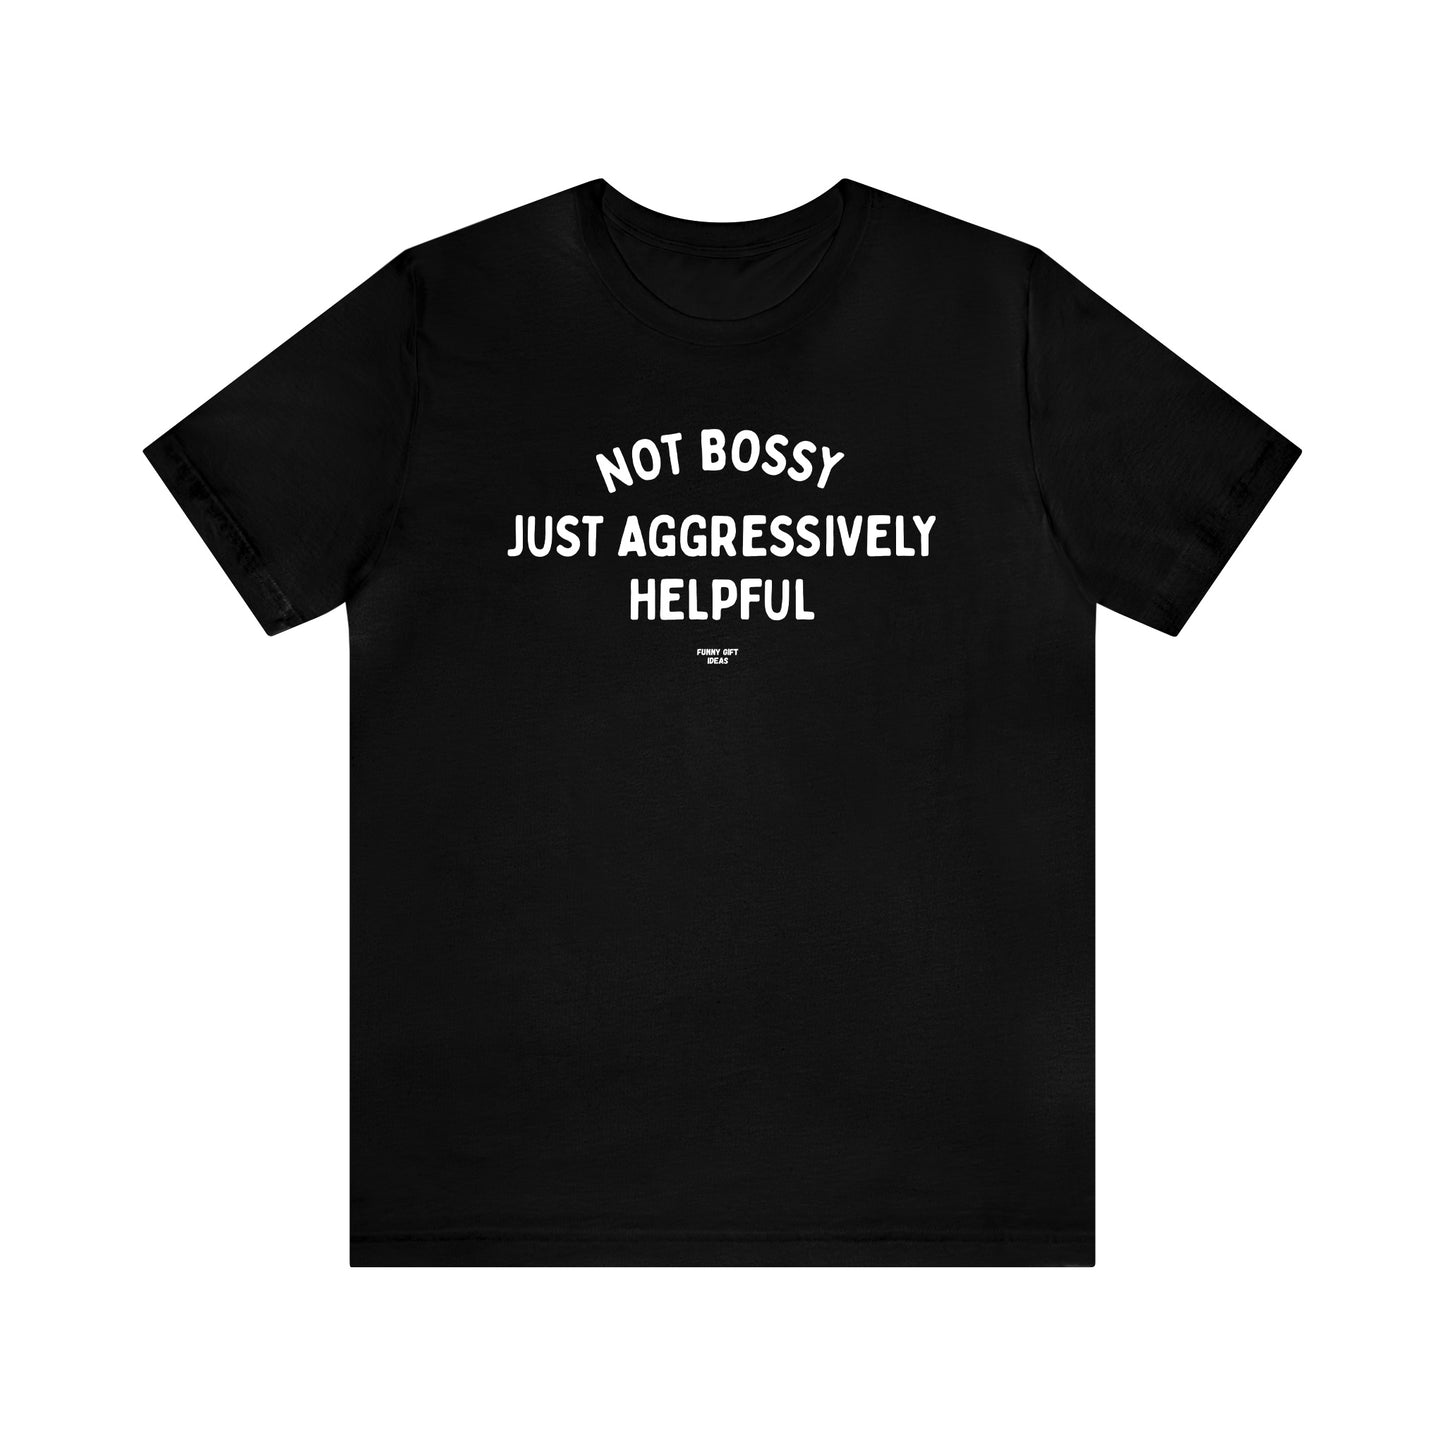 Mens T Shirts - Not Bossy Just Aggressively Helpful - Funny Men T Shirts